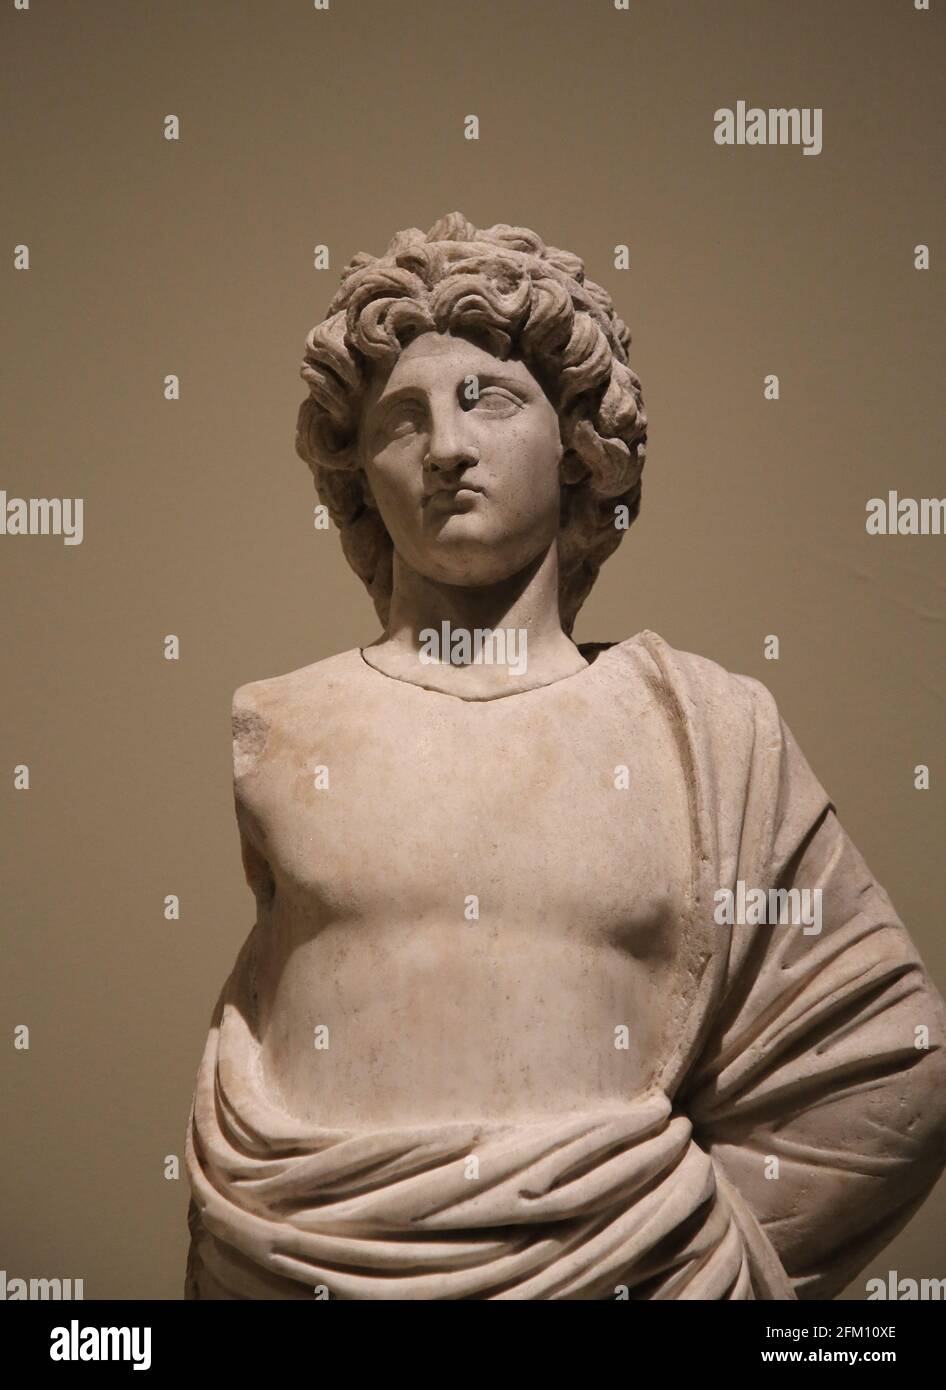 Marble statue of a man. Roman. 2nd BC. Temple of Apollo. Cyrene, Libya, Africa. Style portraits of Alexander the Great. Stock Photo